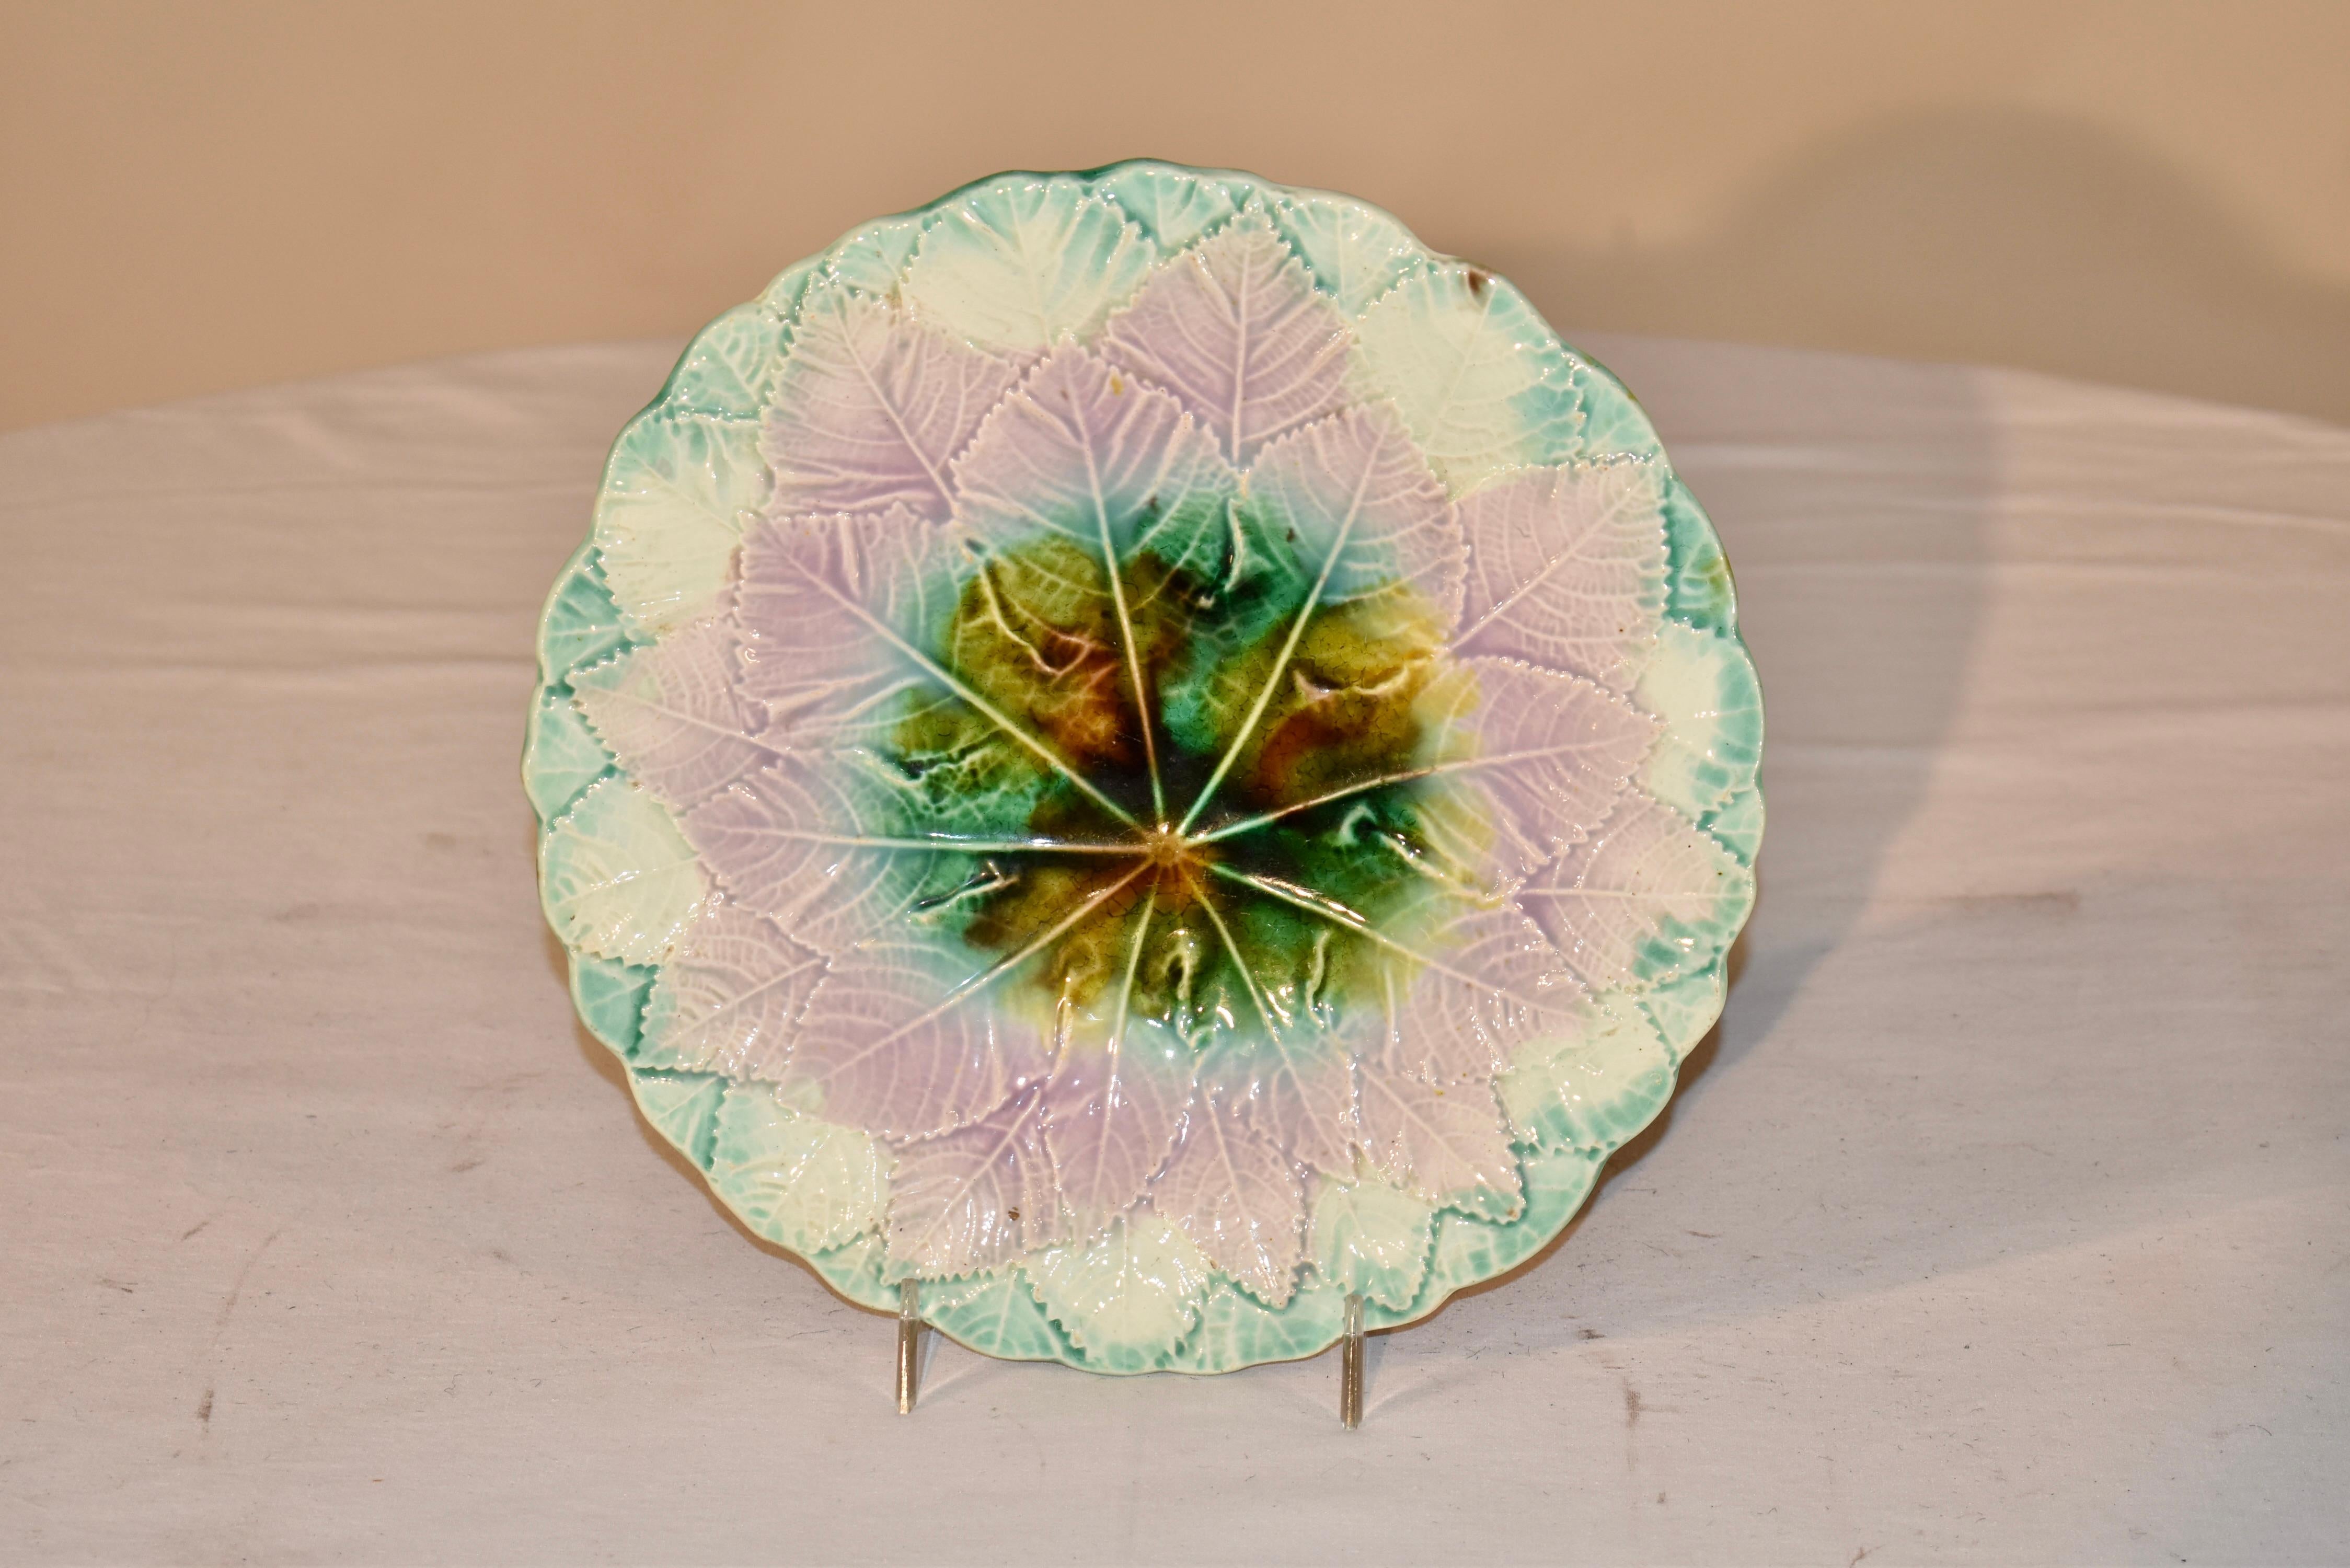 19th century majolica plate from England. The plate is in a lovely color palette with soft pastels and a stronger, more prominently tortoise colored center. The plate is molded in an overlapping leaf pattern and is truly lovely. This is a wonderful